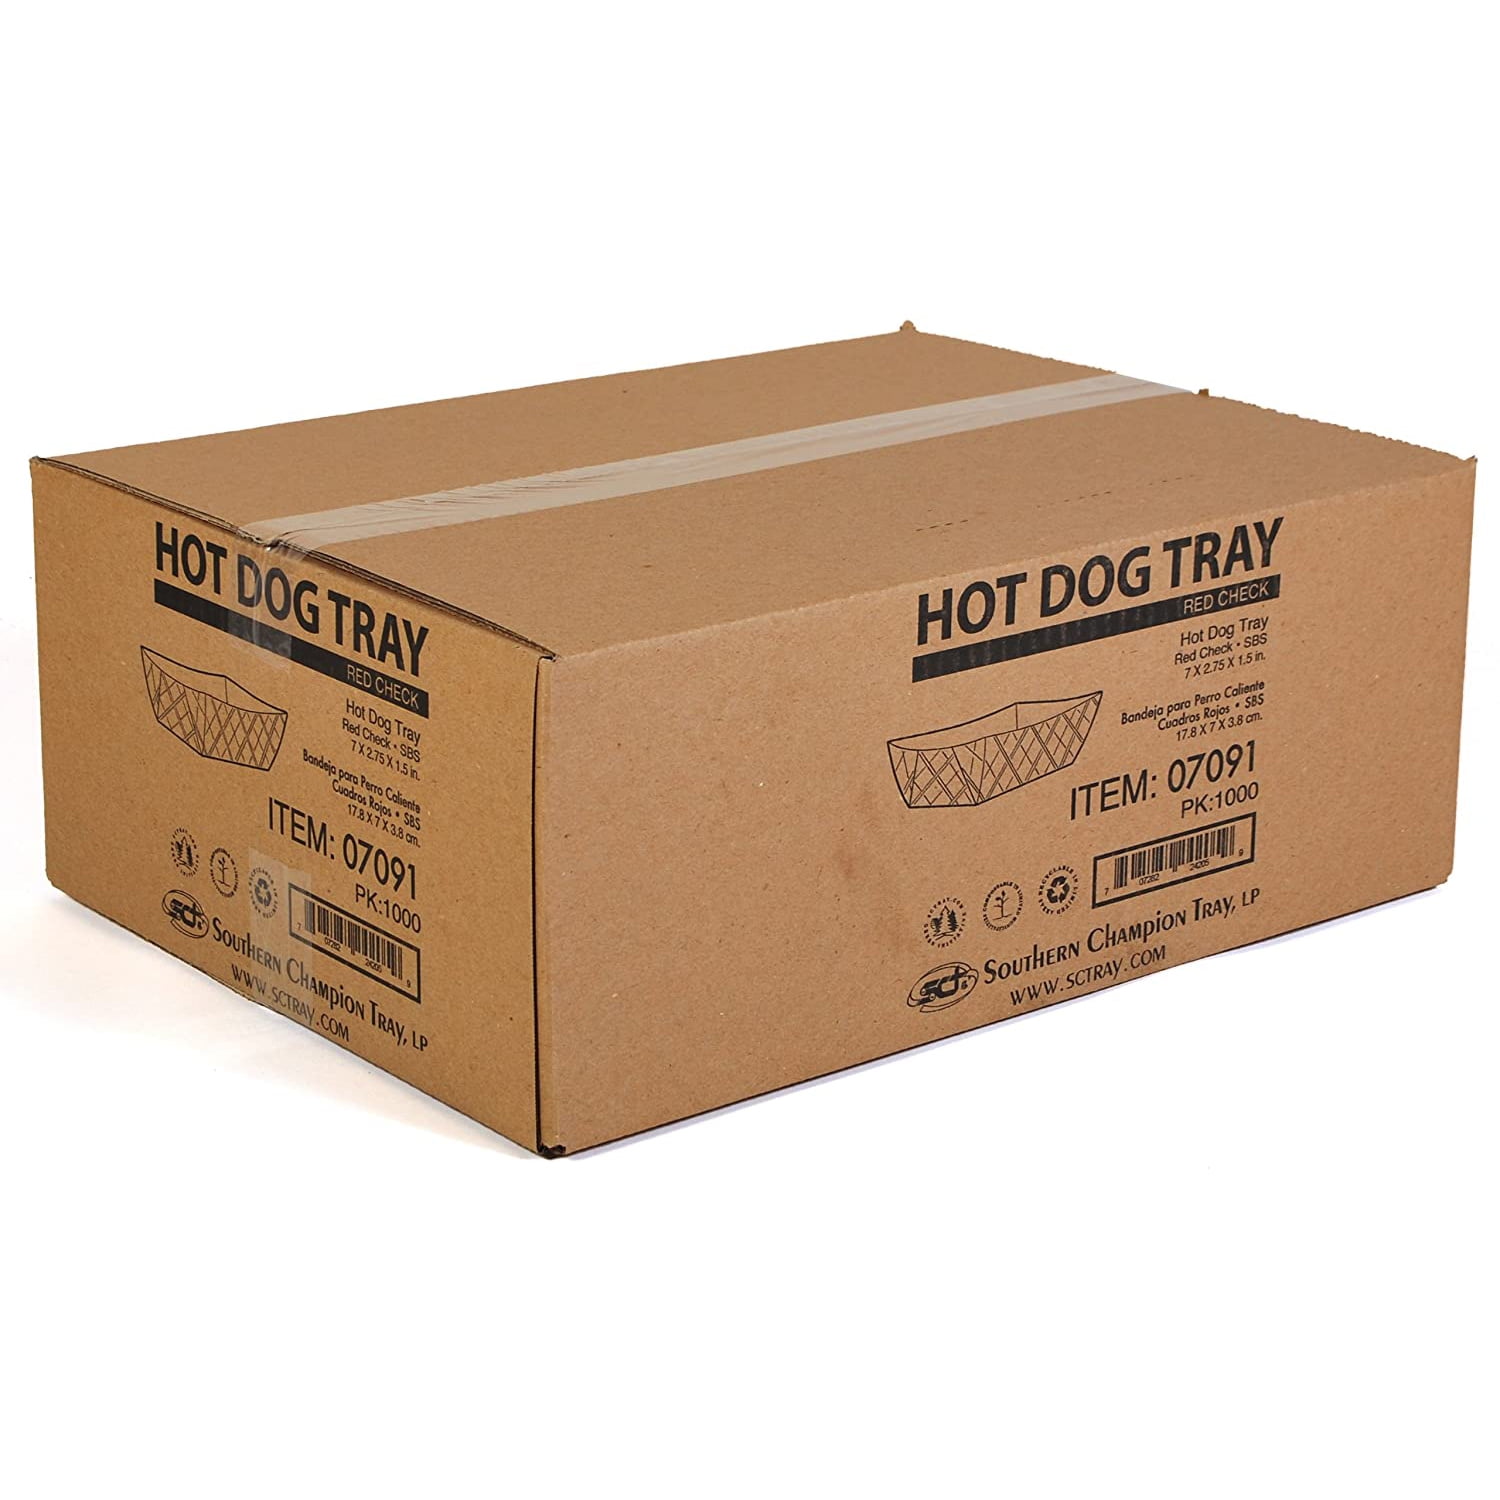 07091 Hot Dog Tray Nested Paper, Red Check - Case Of 1000